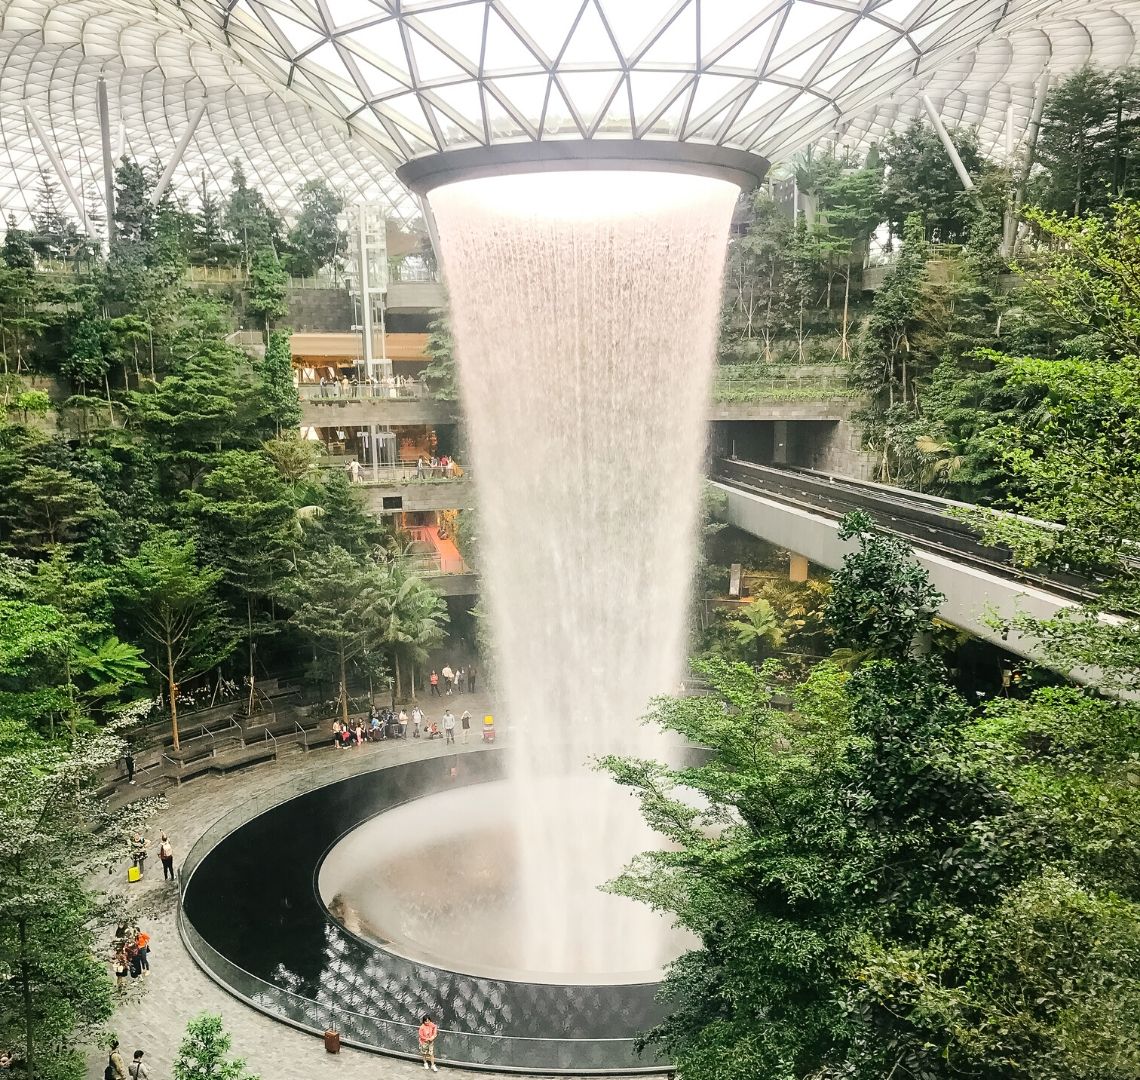 Jewel, Changi Airport, Singapore With Kids - the rain vortex thunders down in the Shiseido Forest Valley. There is a pathway all around where it disappears down to floors below and there are some people on it. There are trees to the left and right. On the right, the sky train track passes through. 